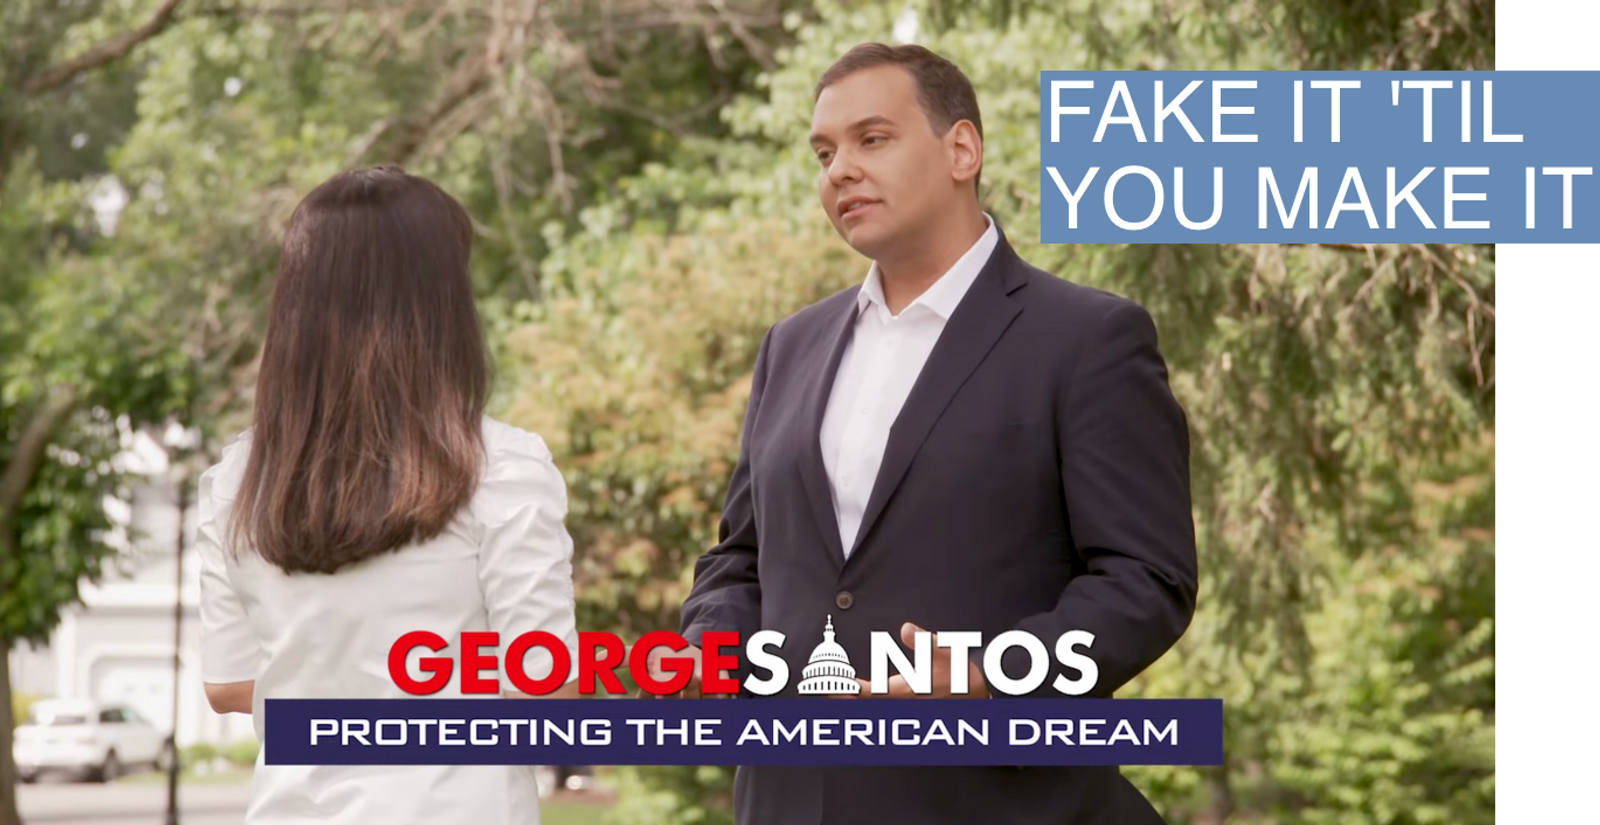 A screengrab from a George Santos campaign ad.